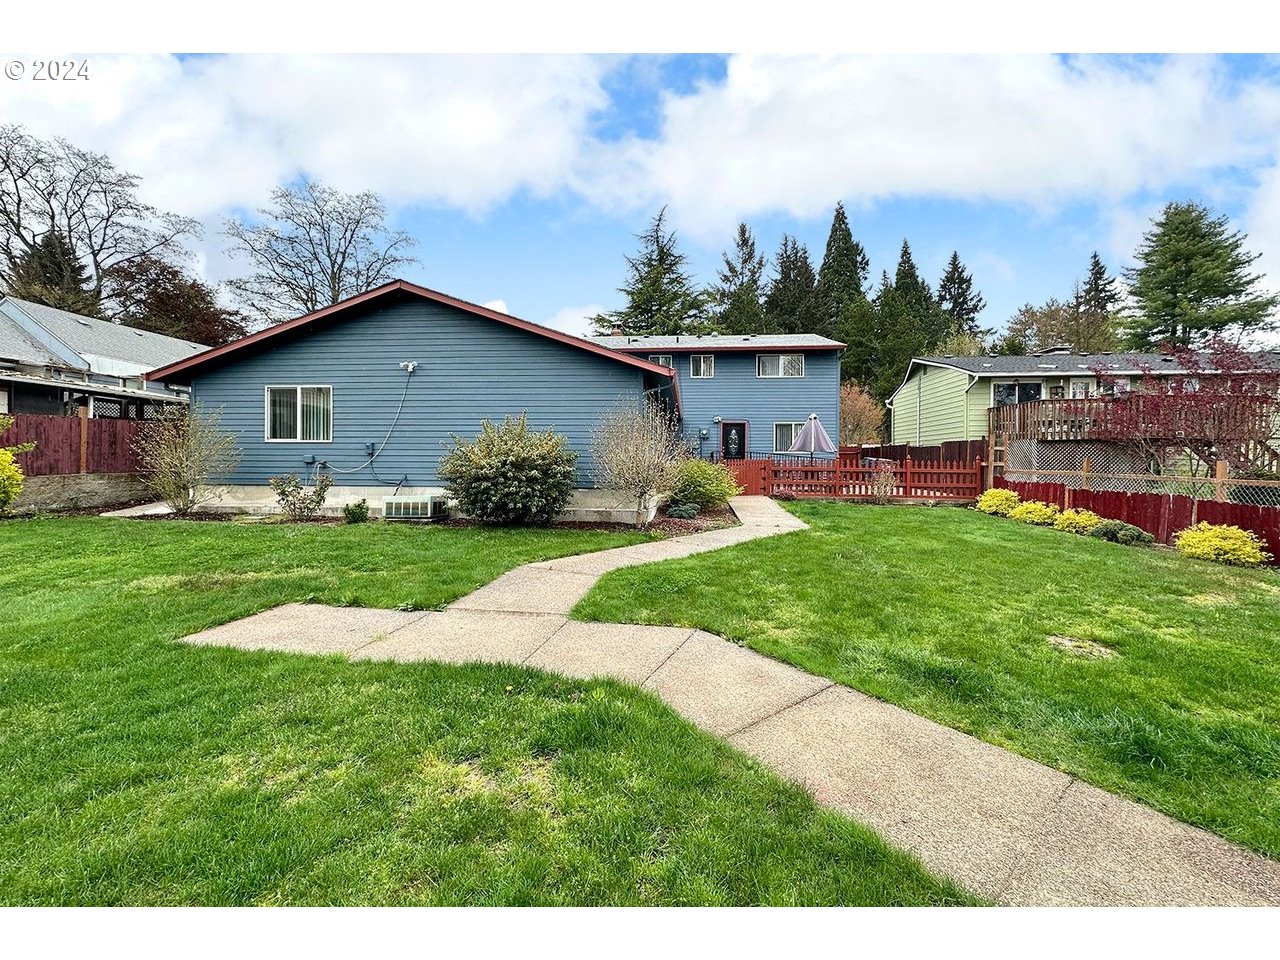 605 NW 116th St, Vancouver, WA 98685